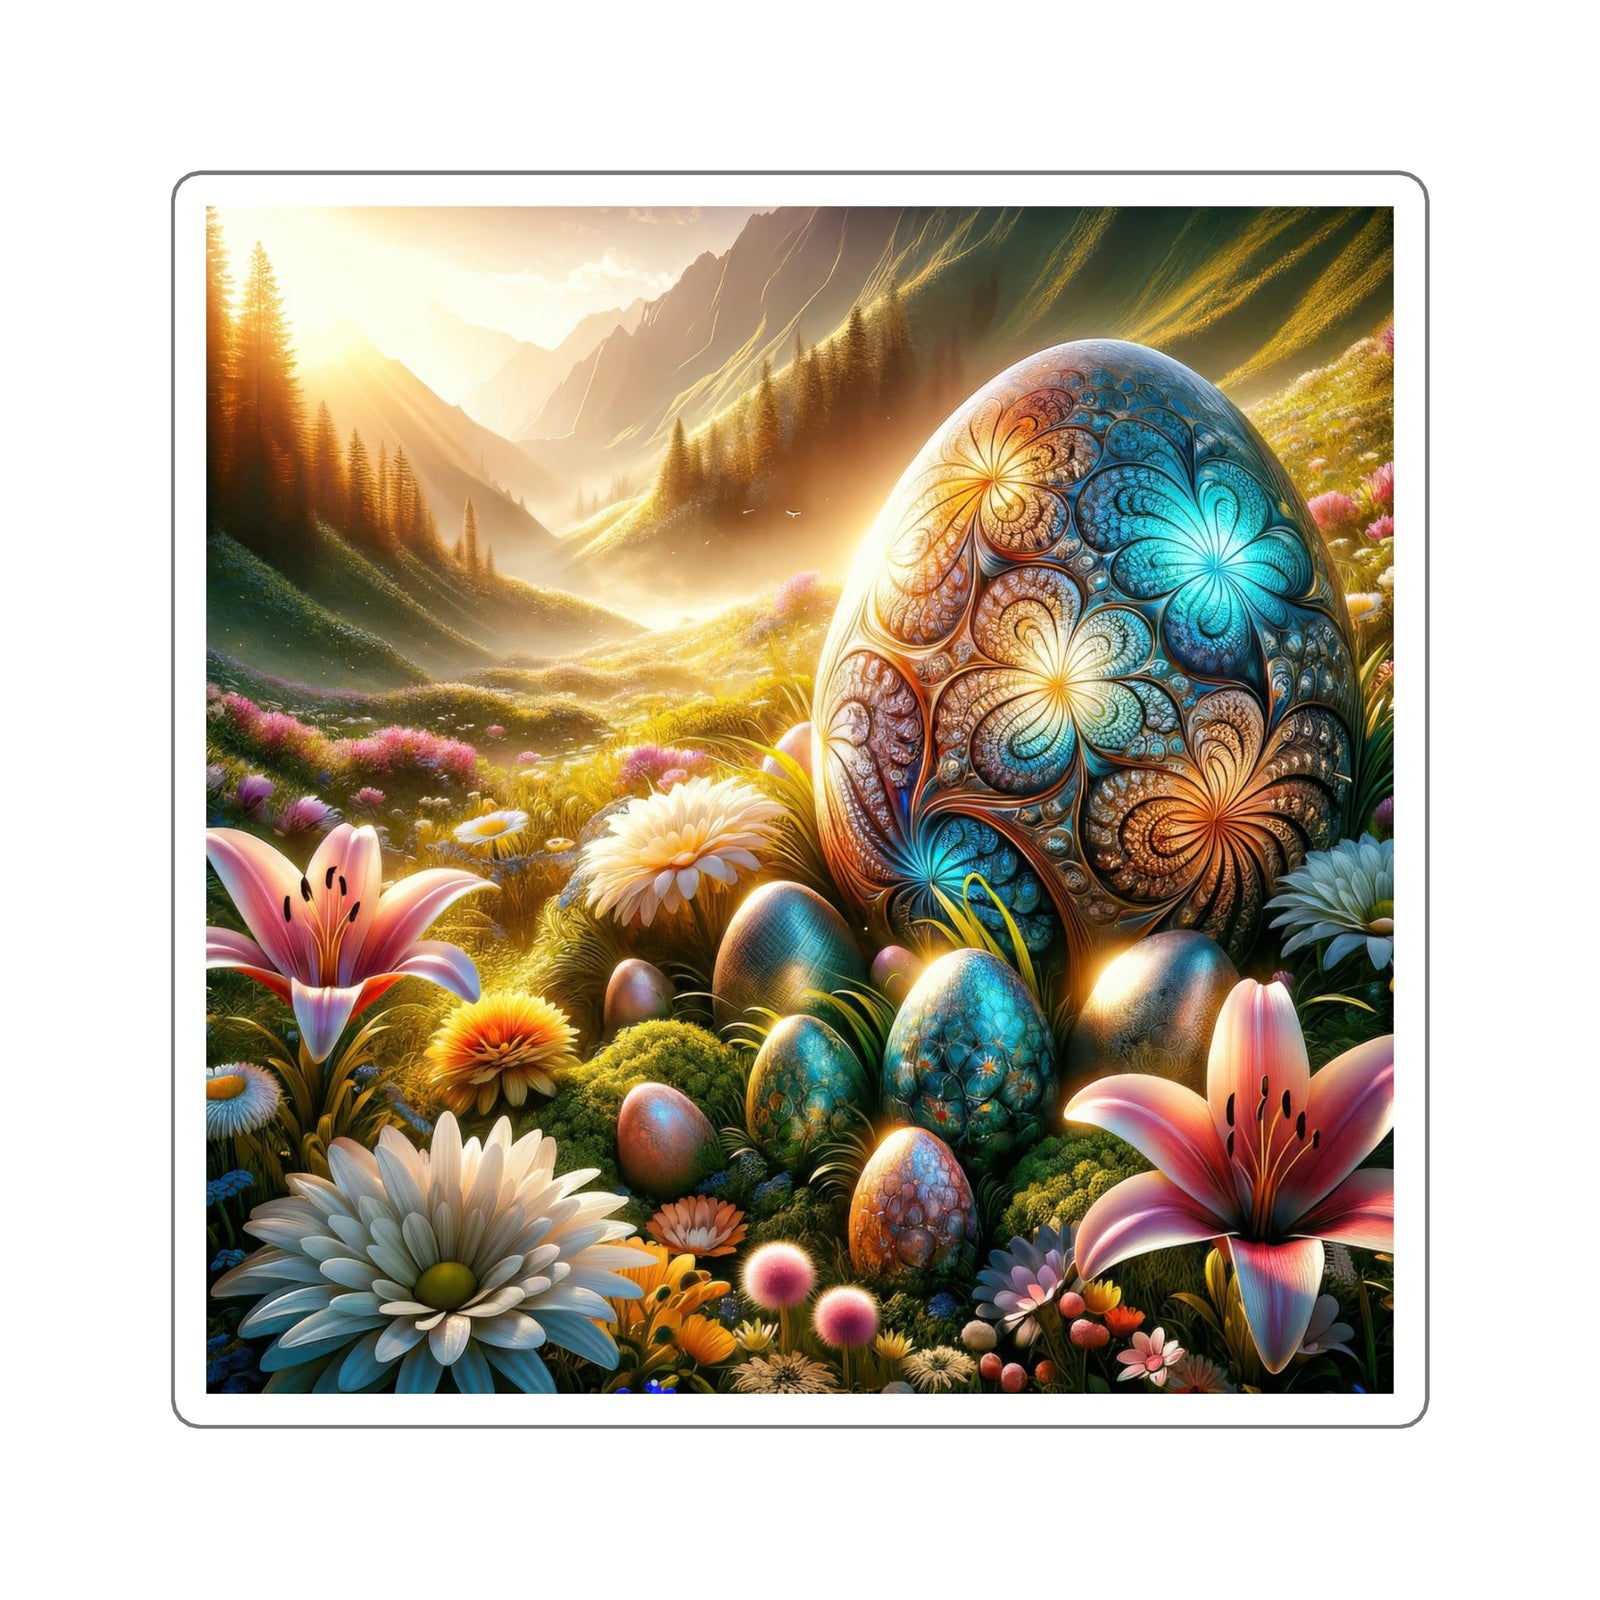 The Gilded Eggs of the Mountain Meadow Stickers